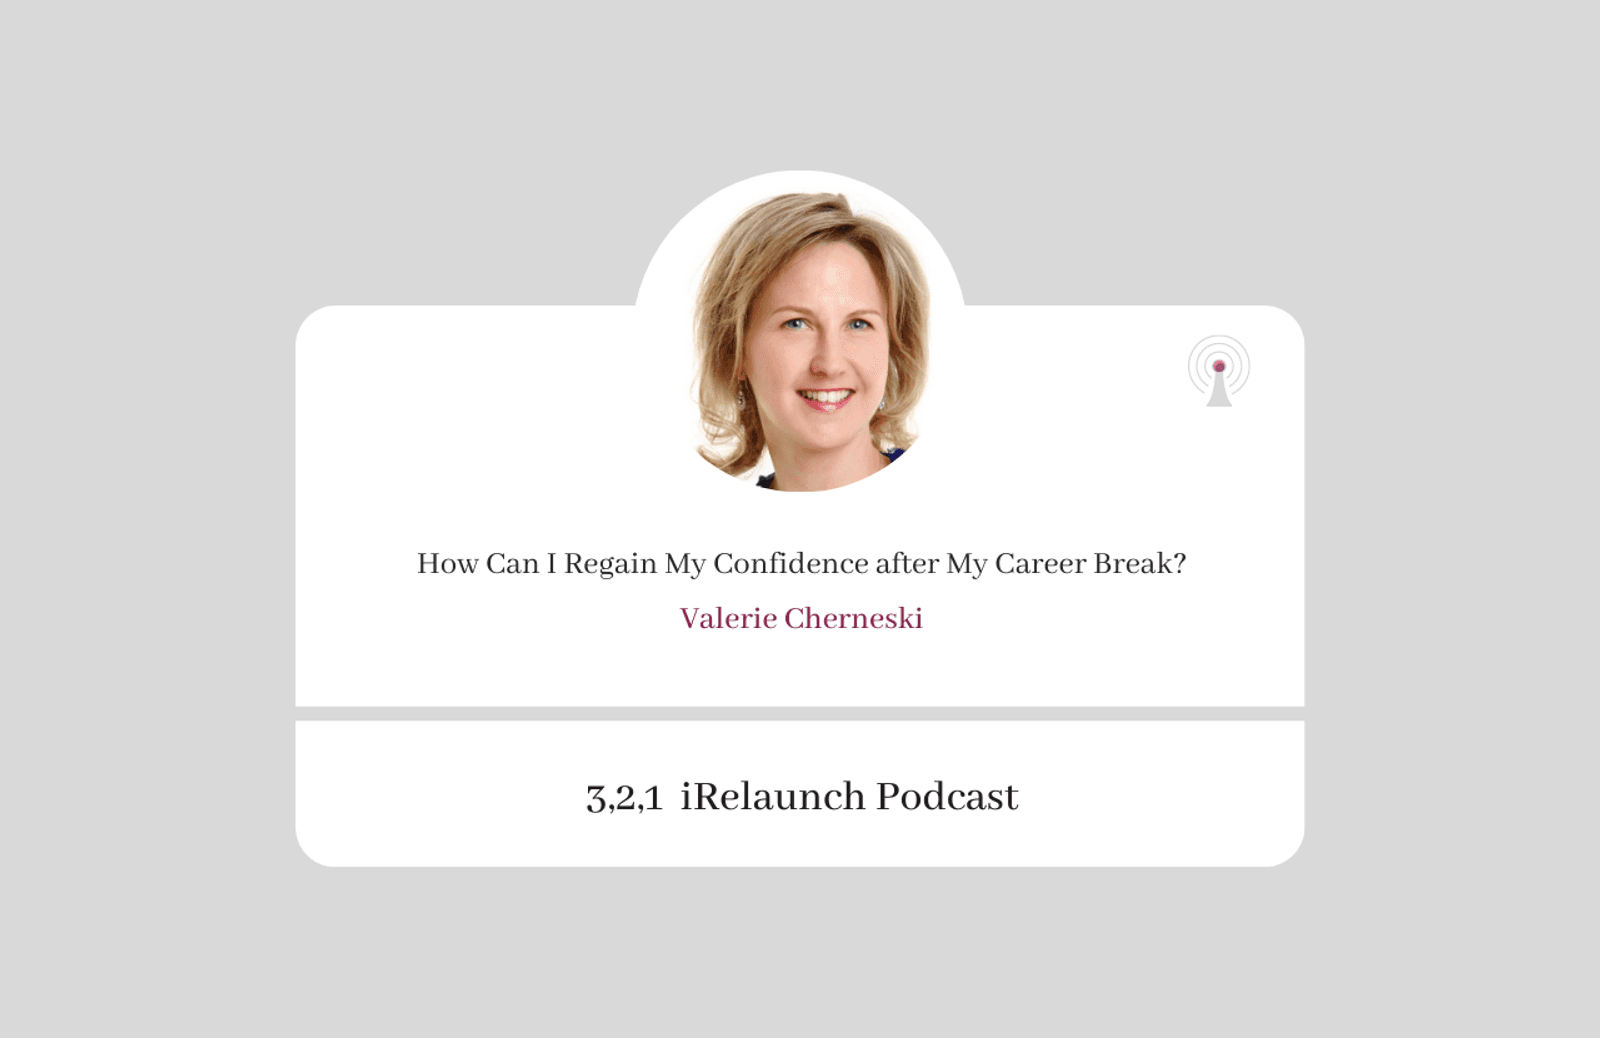 3, 2, 1 iRelaunch Podcast Thumbnail for Episode #4 with Valerie Cherneski's headshot. The episode's title is: "How Can I Regain My Confidence after My Career Break?